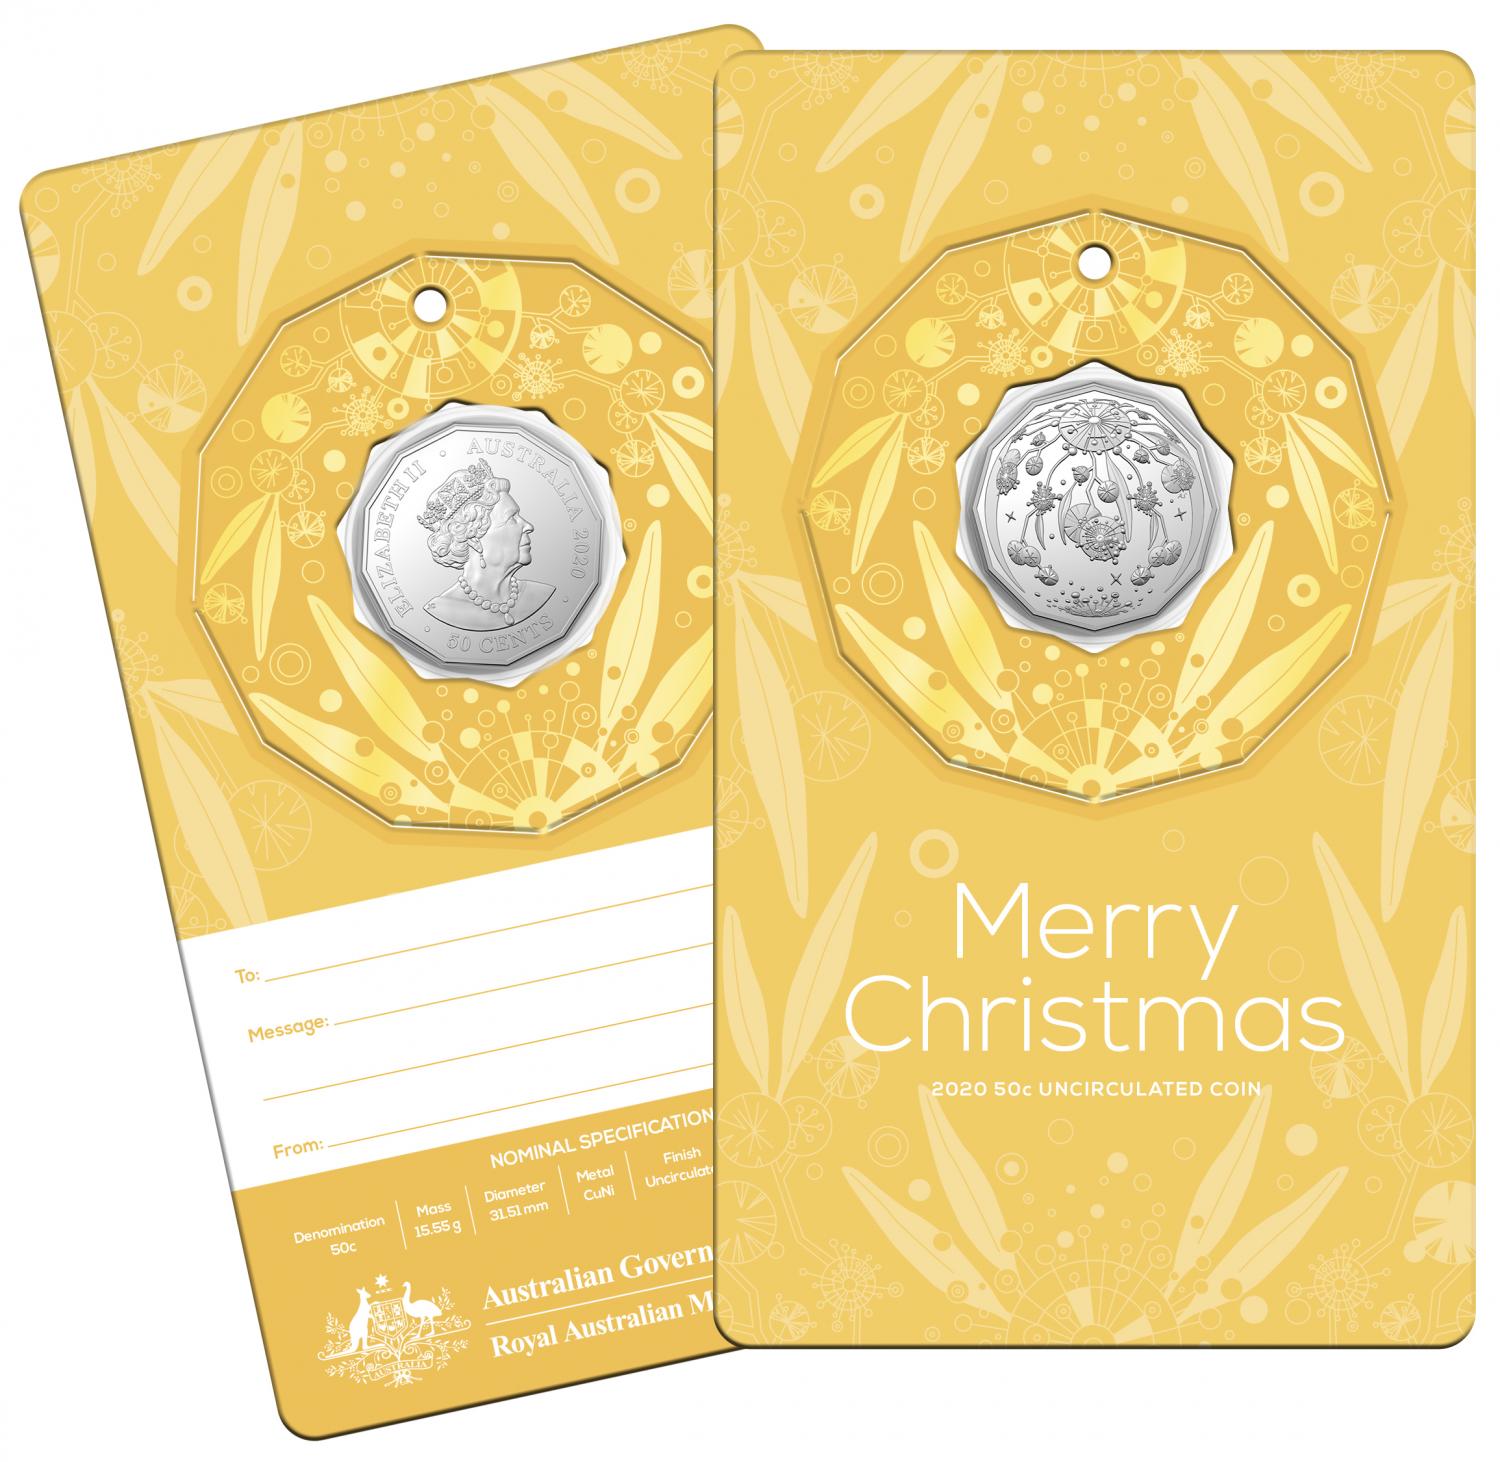 Thumbnail for 2020 Christmas .50c UNC Coin - Yellow Card Decoration